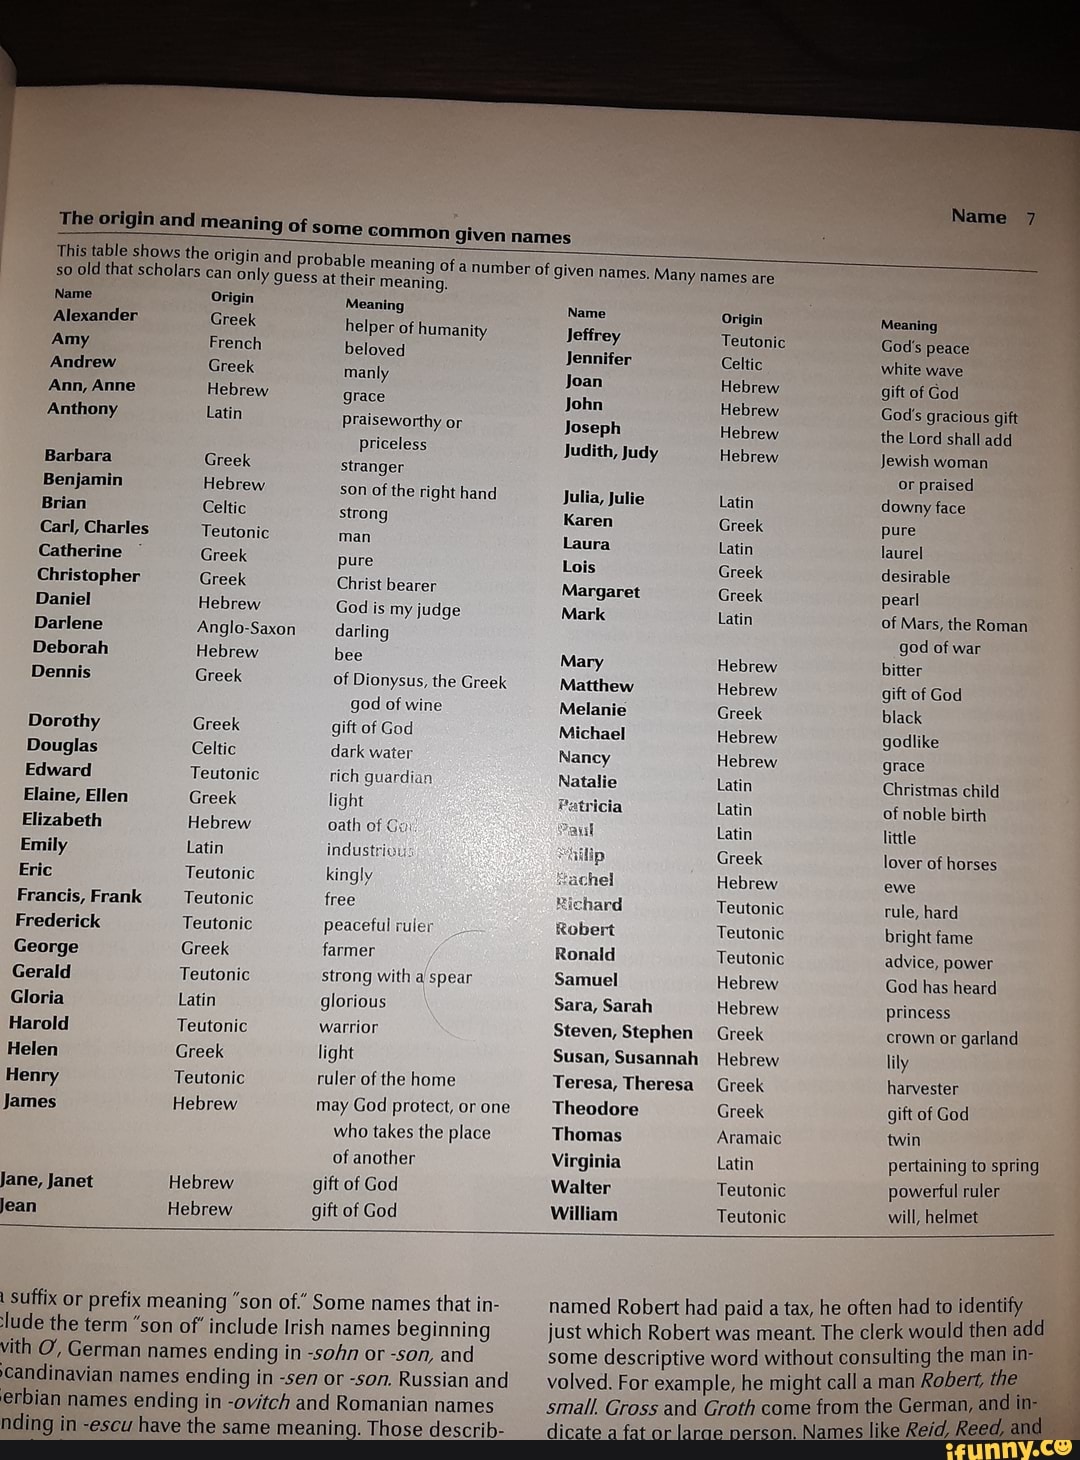 The origin and meaning of some common given names This table shows the